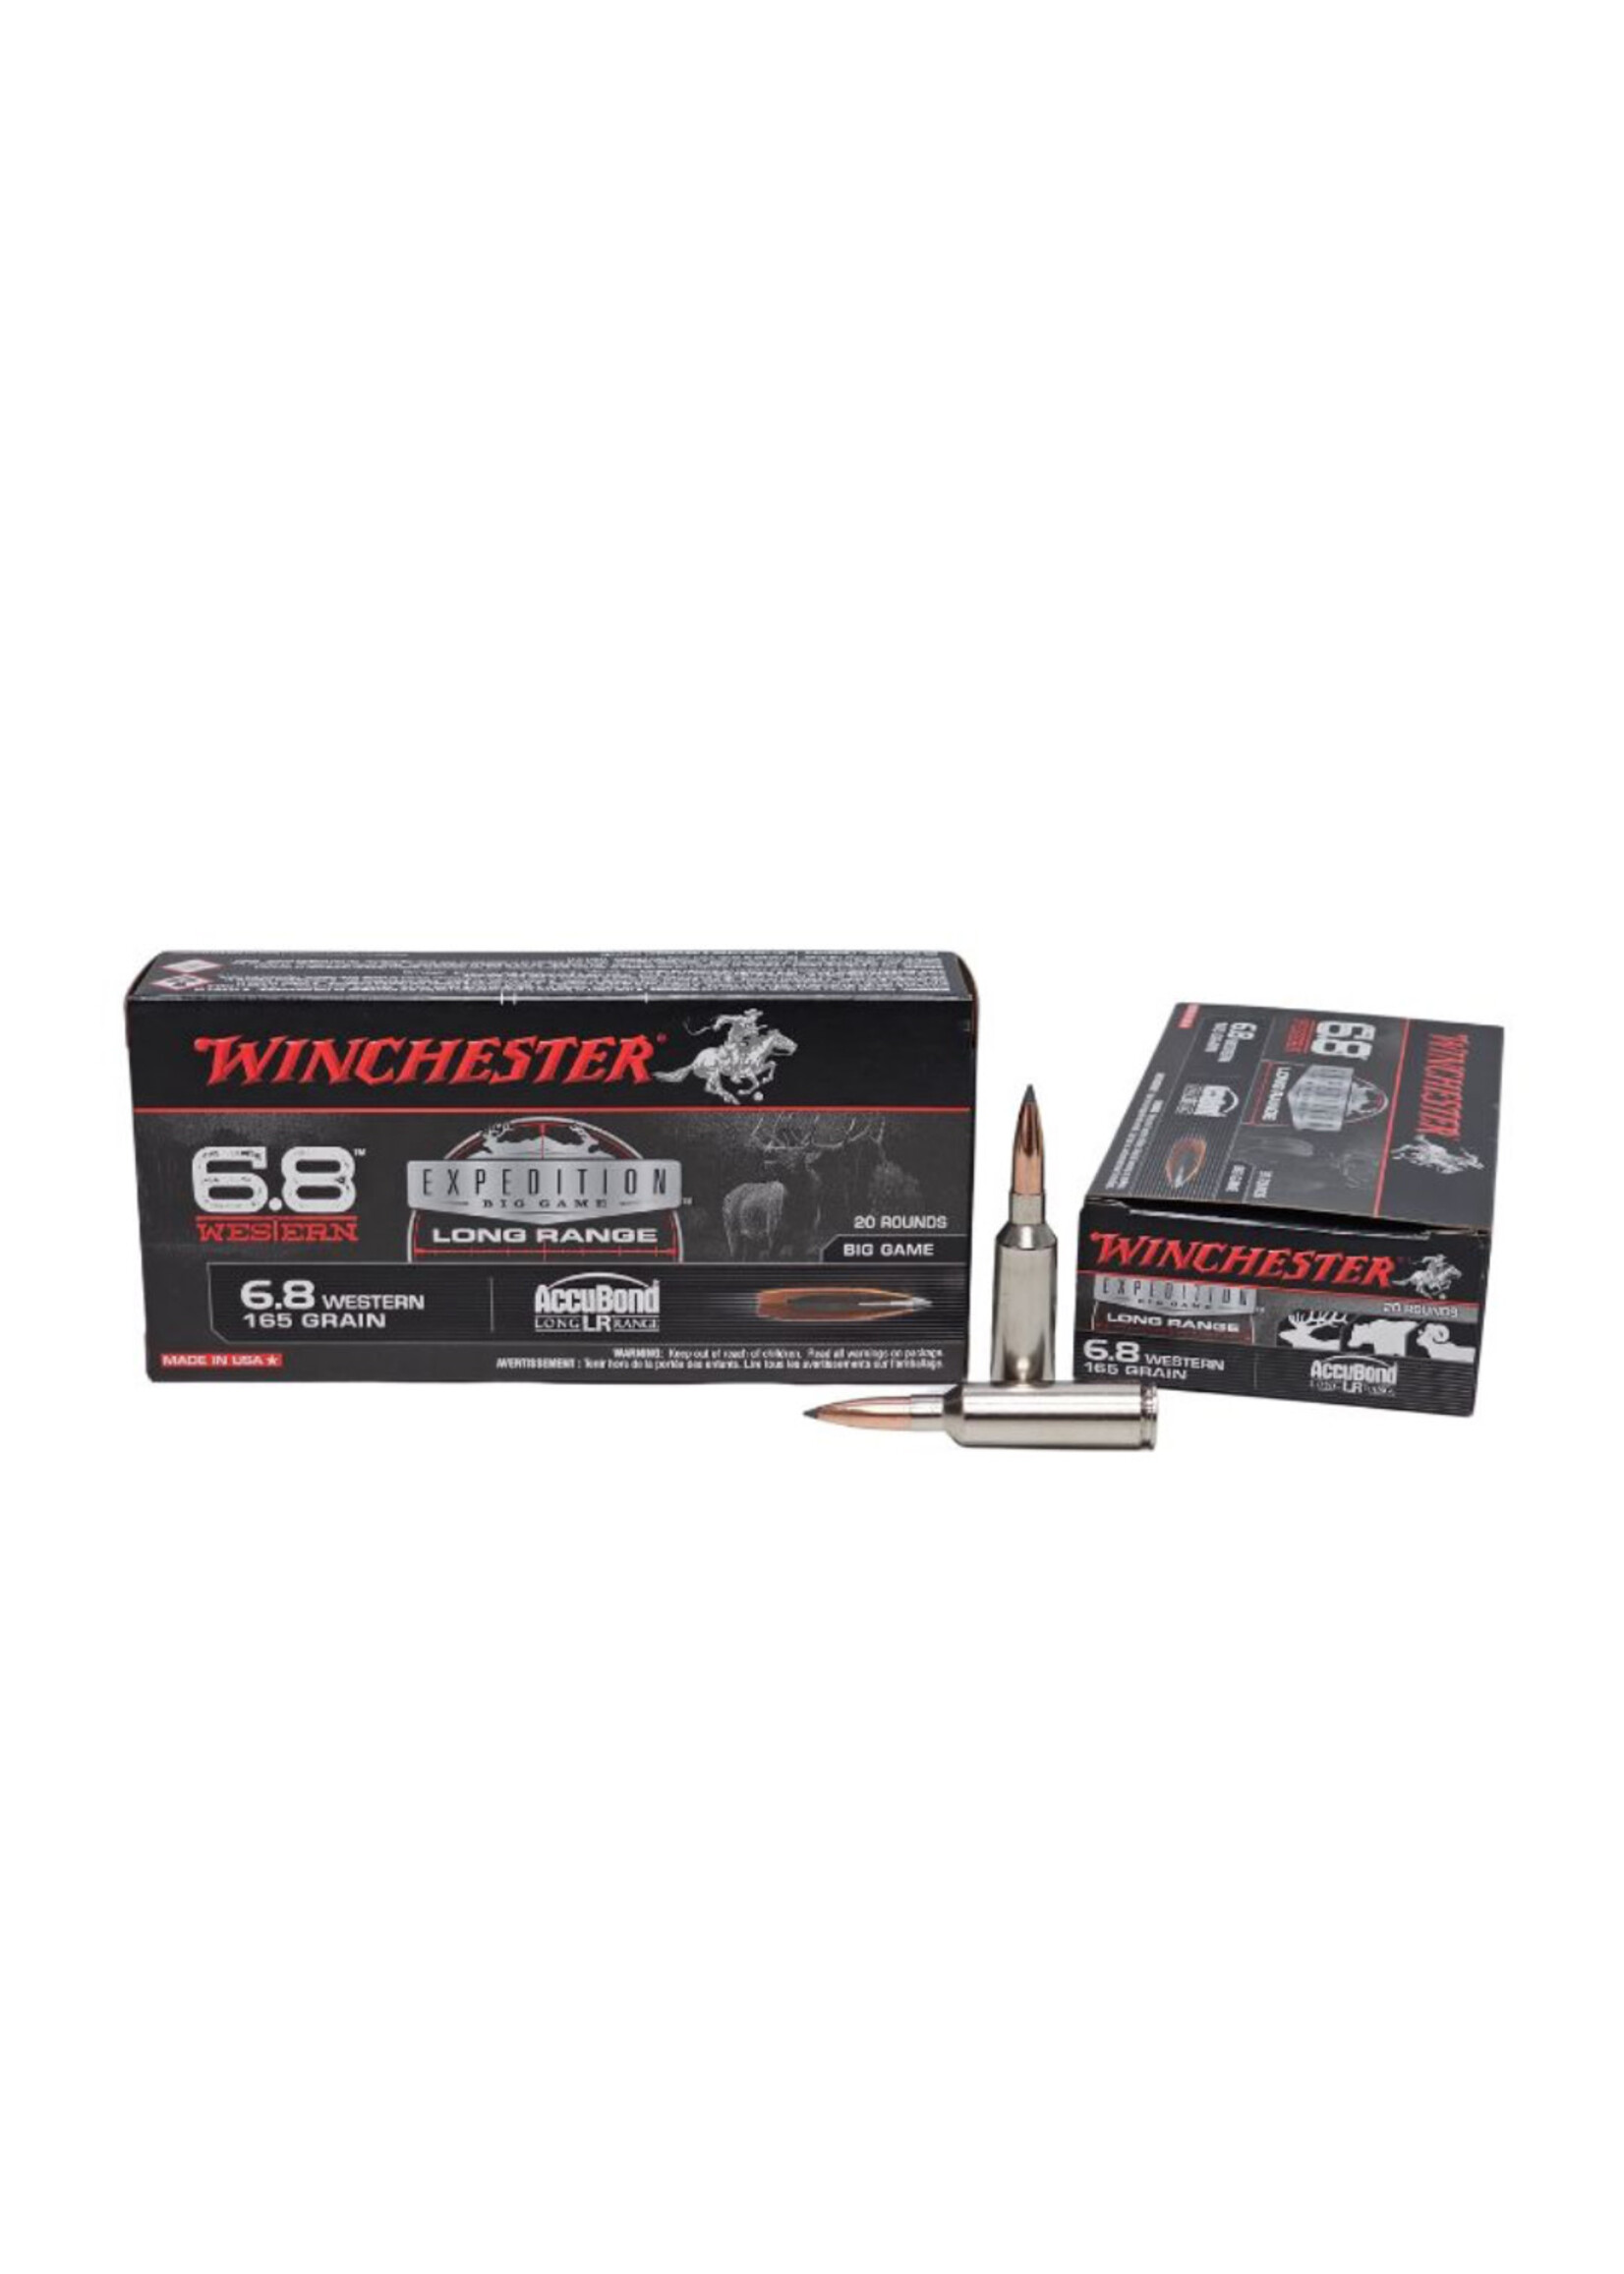 WINCHESTER WINCHESTER 6.8 WESTERN 165 GR ACCUBOND LR 20 RDS